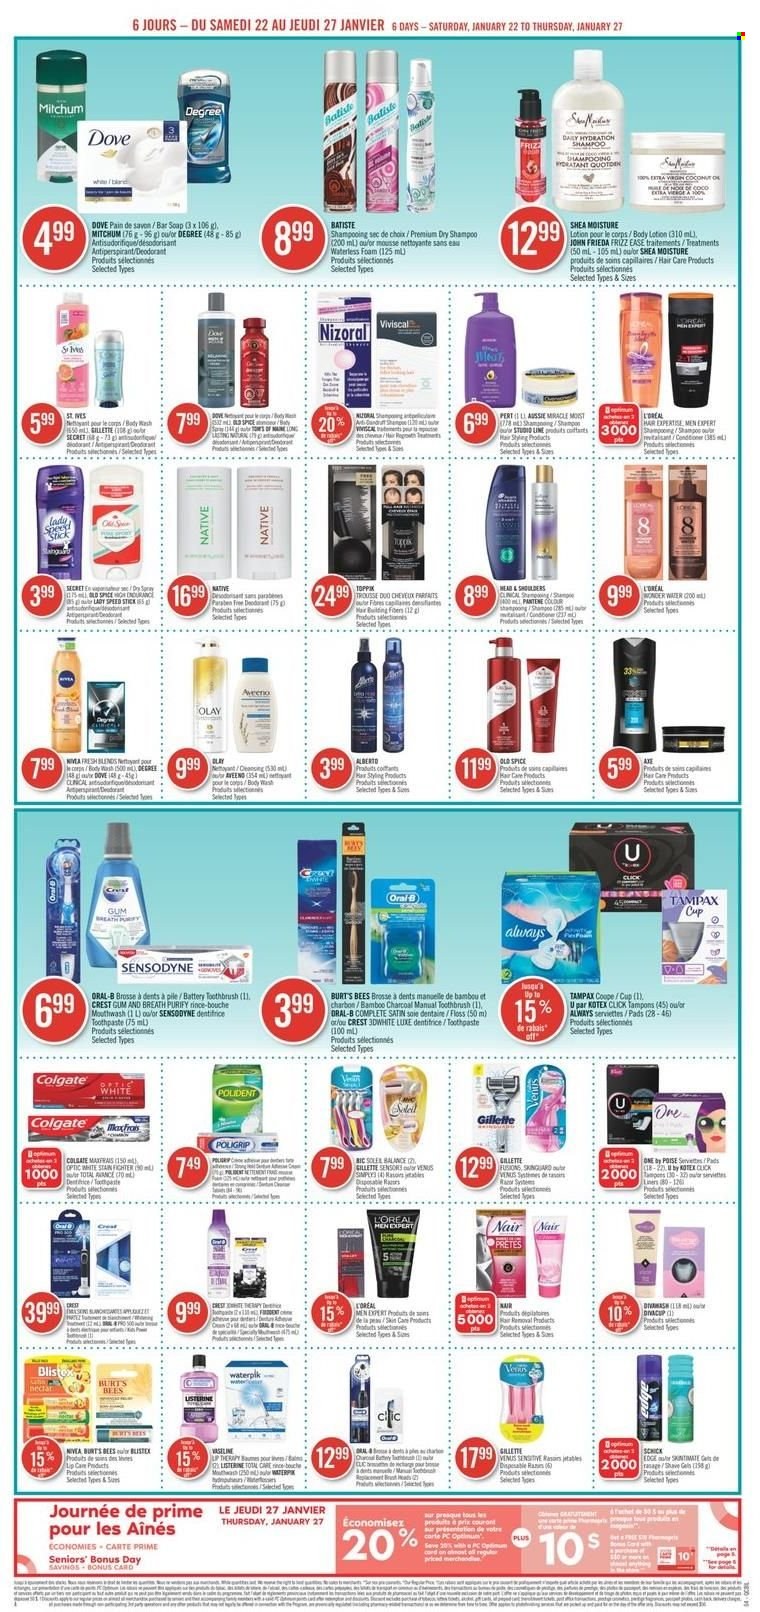 thumbnail - Pharmaprix Flyer - January 22, 2022 - January 27, 2022 - Sales products - Ace, spice, Aveeno, body wash, soap bar, soap, toothbrush, toothpaste, mouthwash, Polident, Crest, Kotex, tampons, L’Oréal, Olay, Aussie, John Frieda, Toppik, body lotion, anti-perspirant, Speed Stick, BIC, Venus, Smeg, cup, Dove, Colgate, Gillette, shampoo, Tampax, Pantene, Nivea, Old Spice, Oral-B, Sensodyne, deodorant. Page 4.